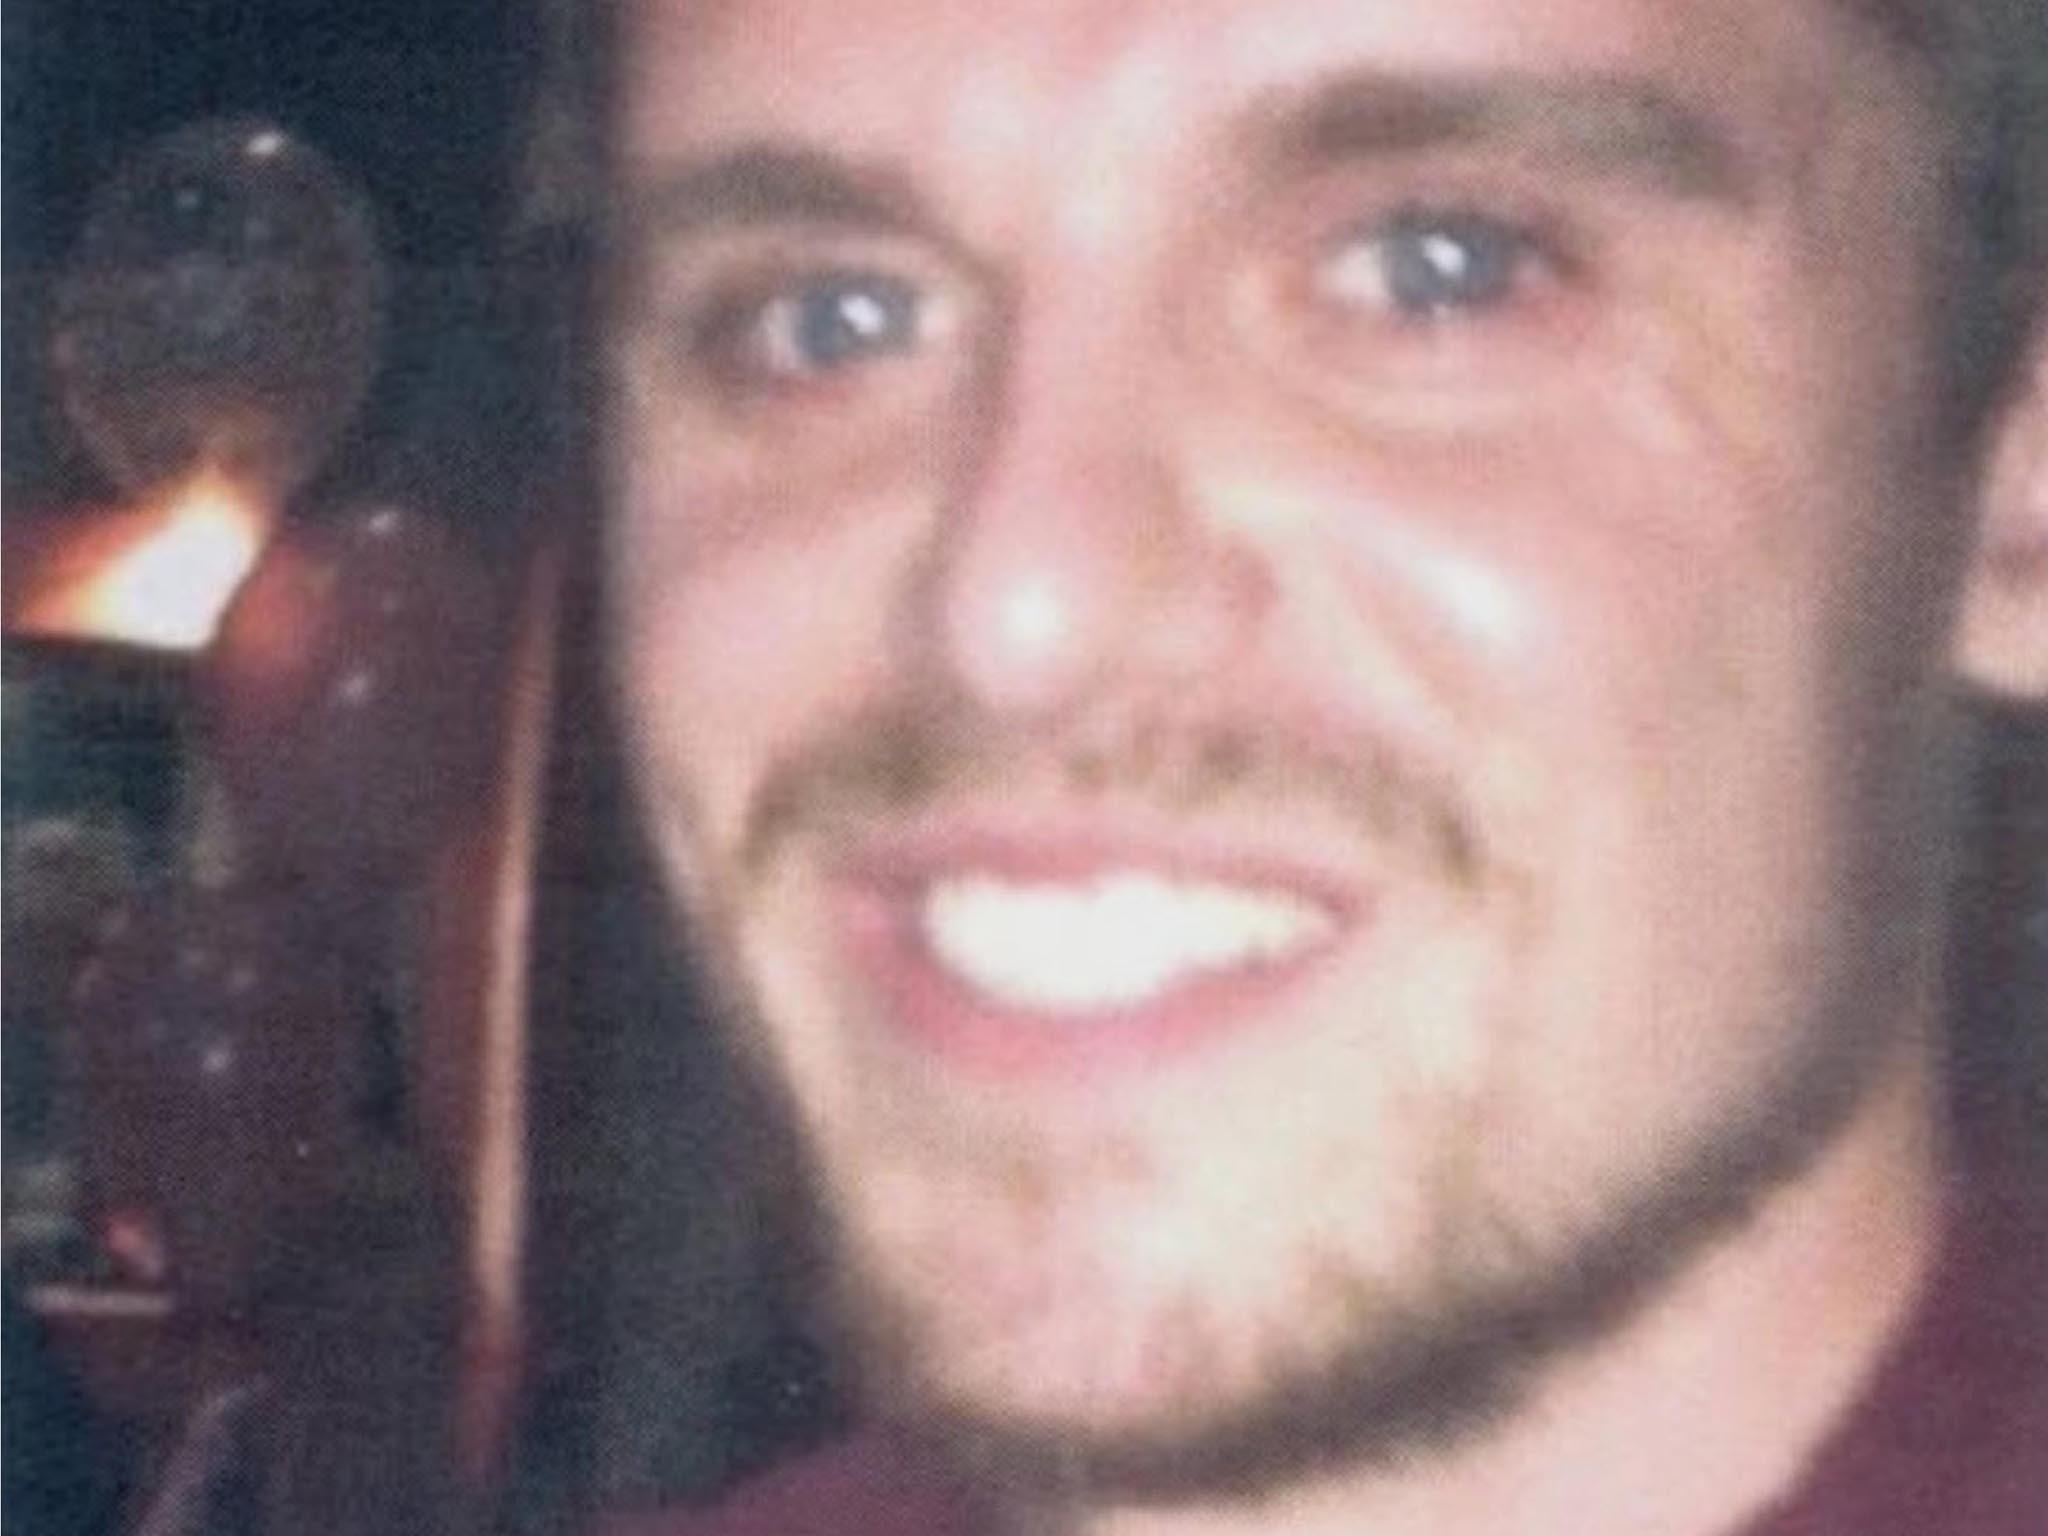 Matthew Bryce, who was missing for 30 hours